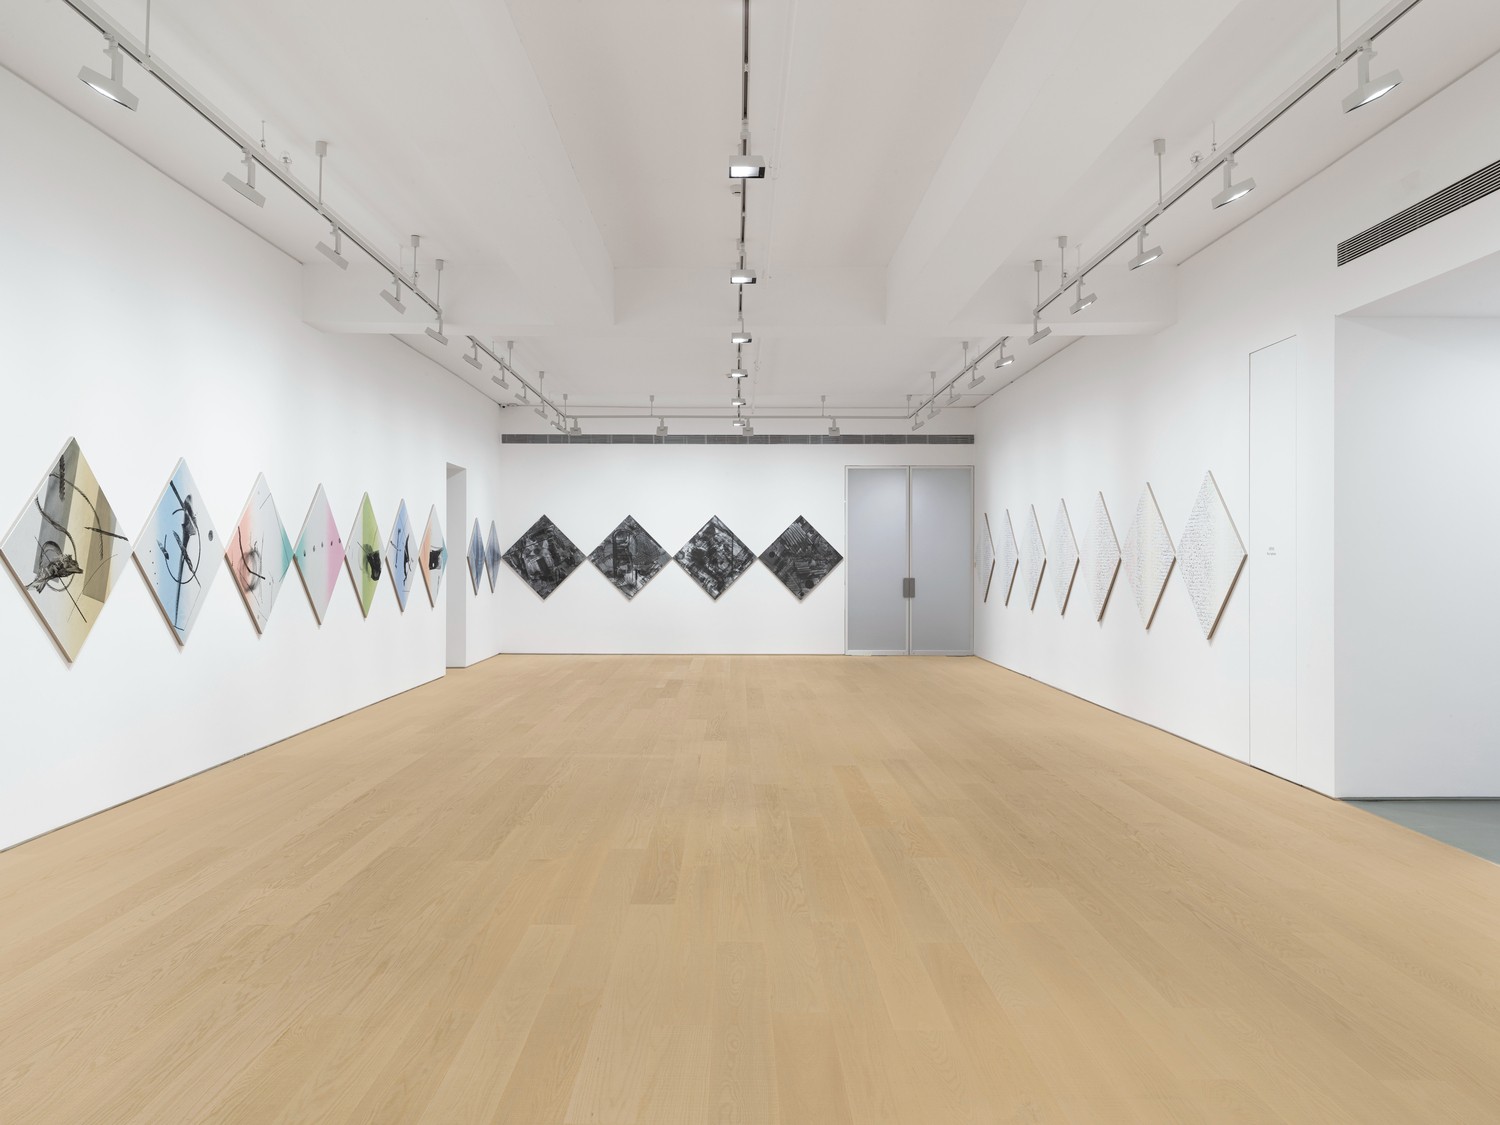 Installation image for Cheyney Thompson: Intervals, at Lisson Gallery